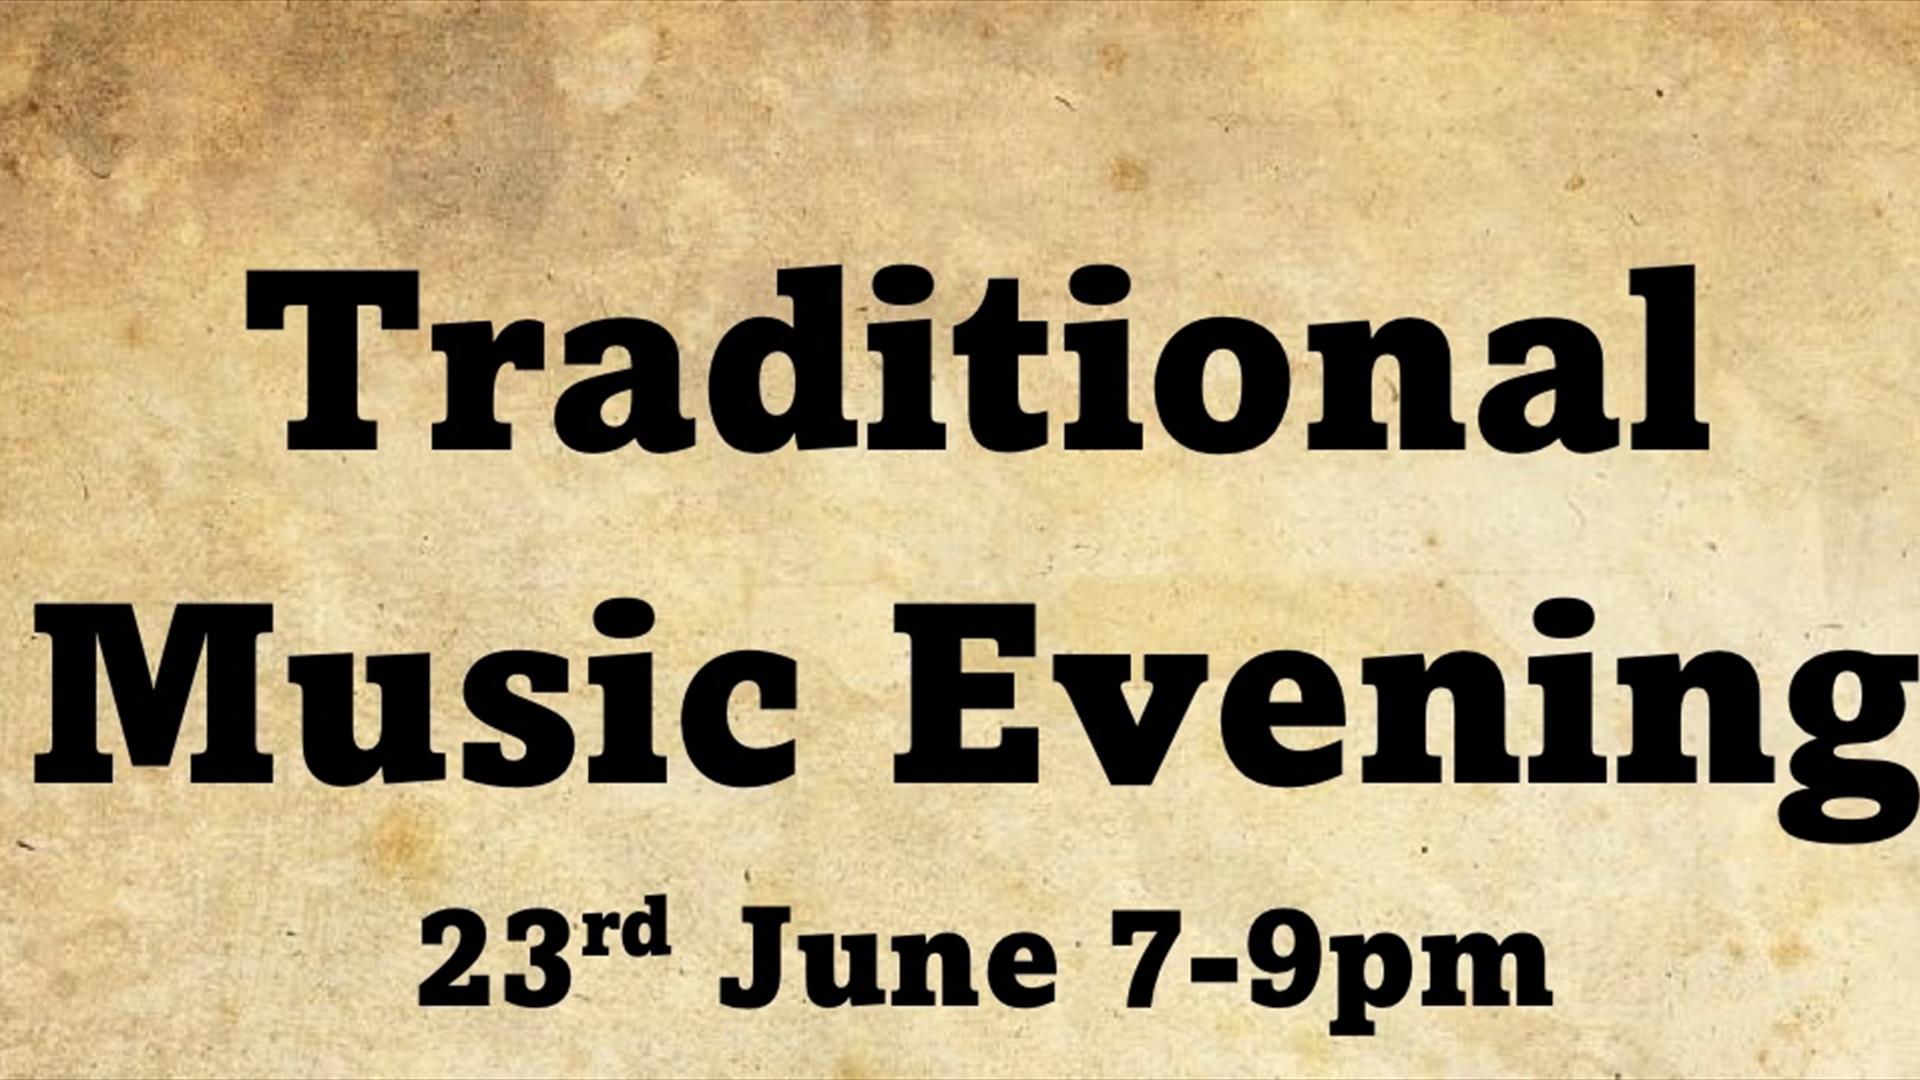 Traditional Music Evening, 23rd June 7-9pm